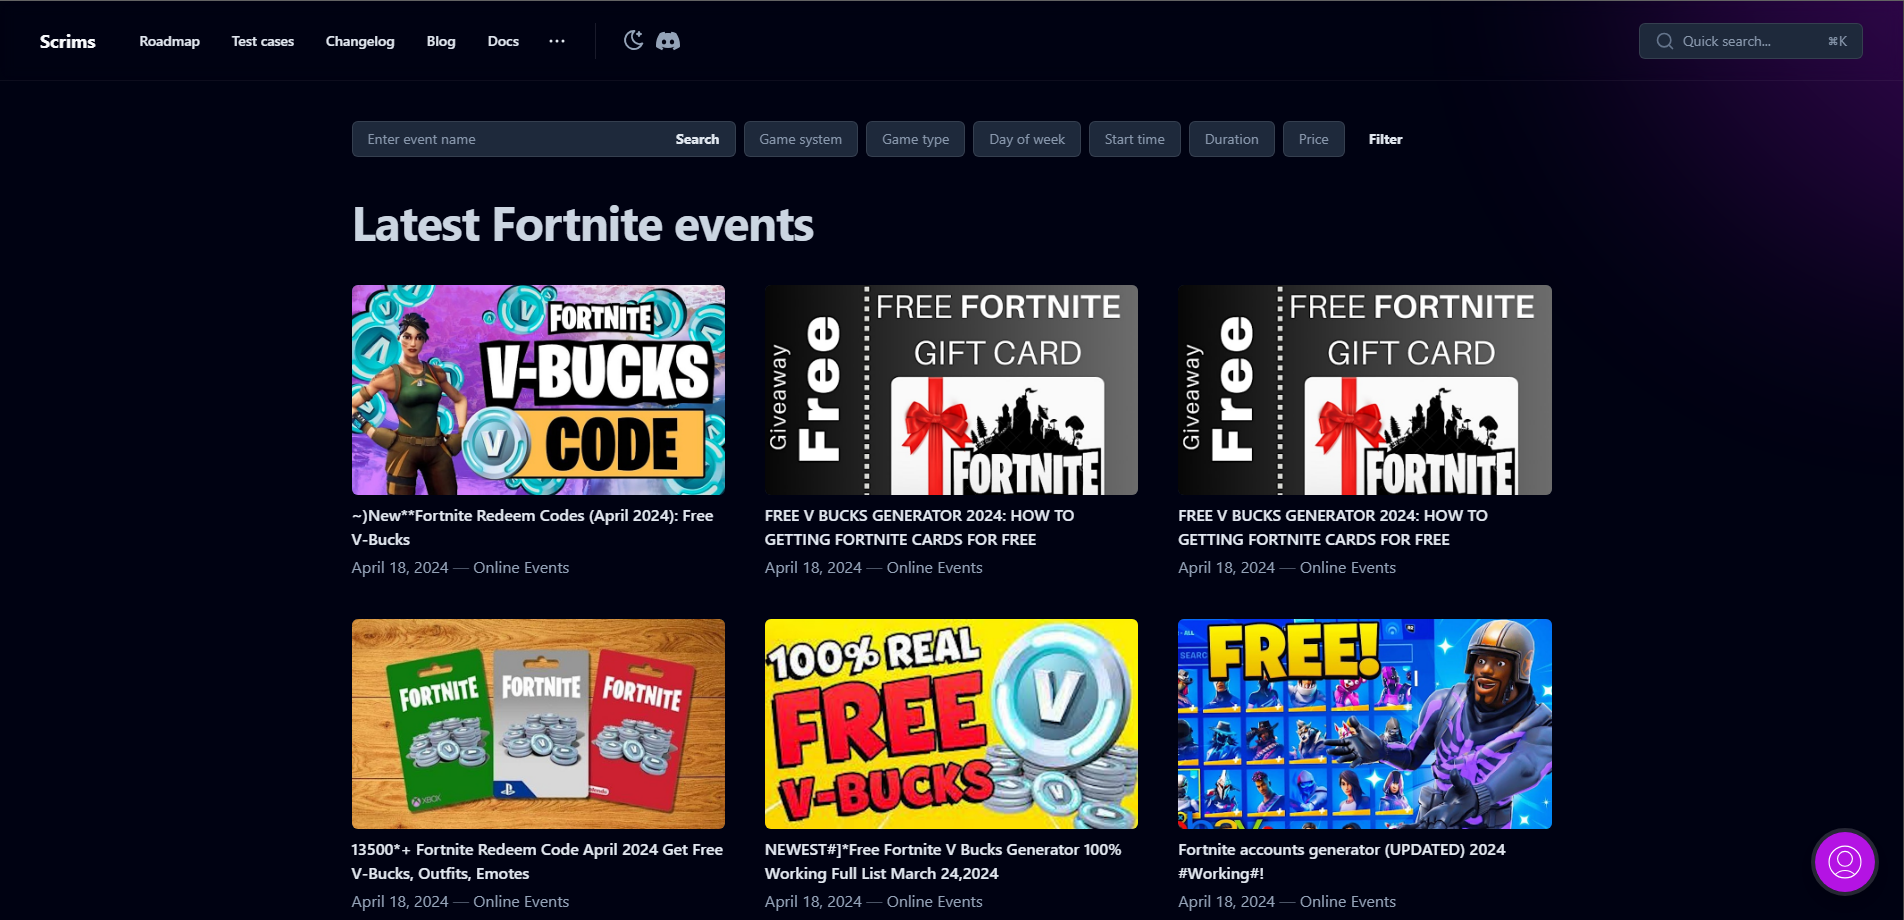 Gaming events curation from across the web